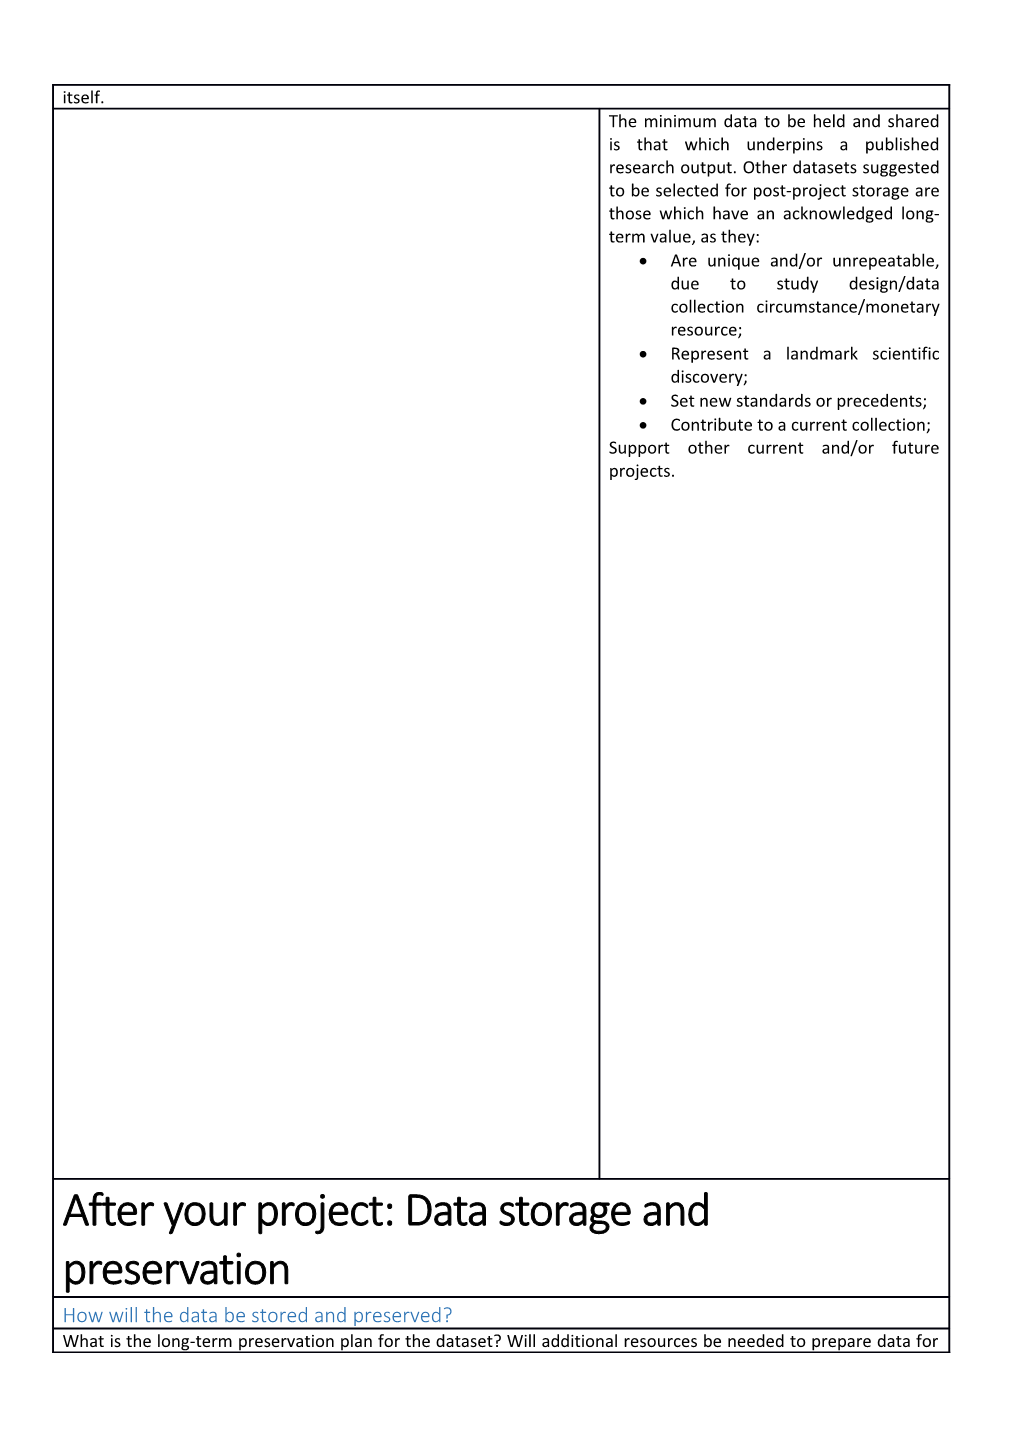 How Much Data Do You Expect to Create During the Project?